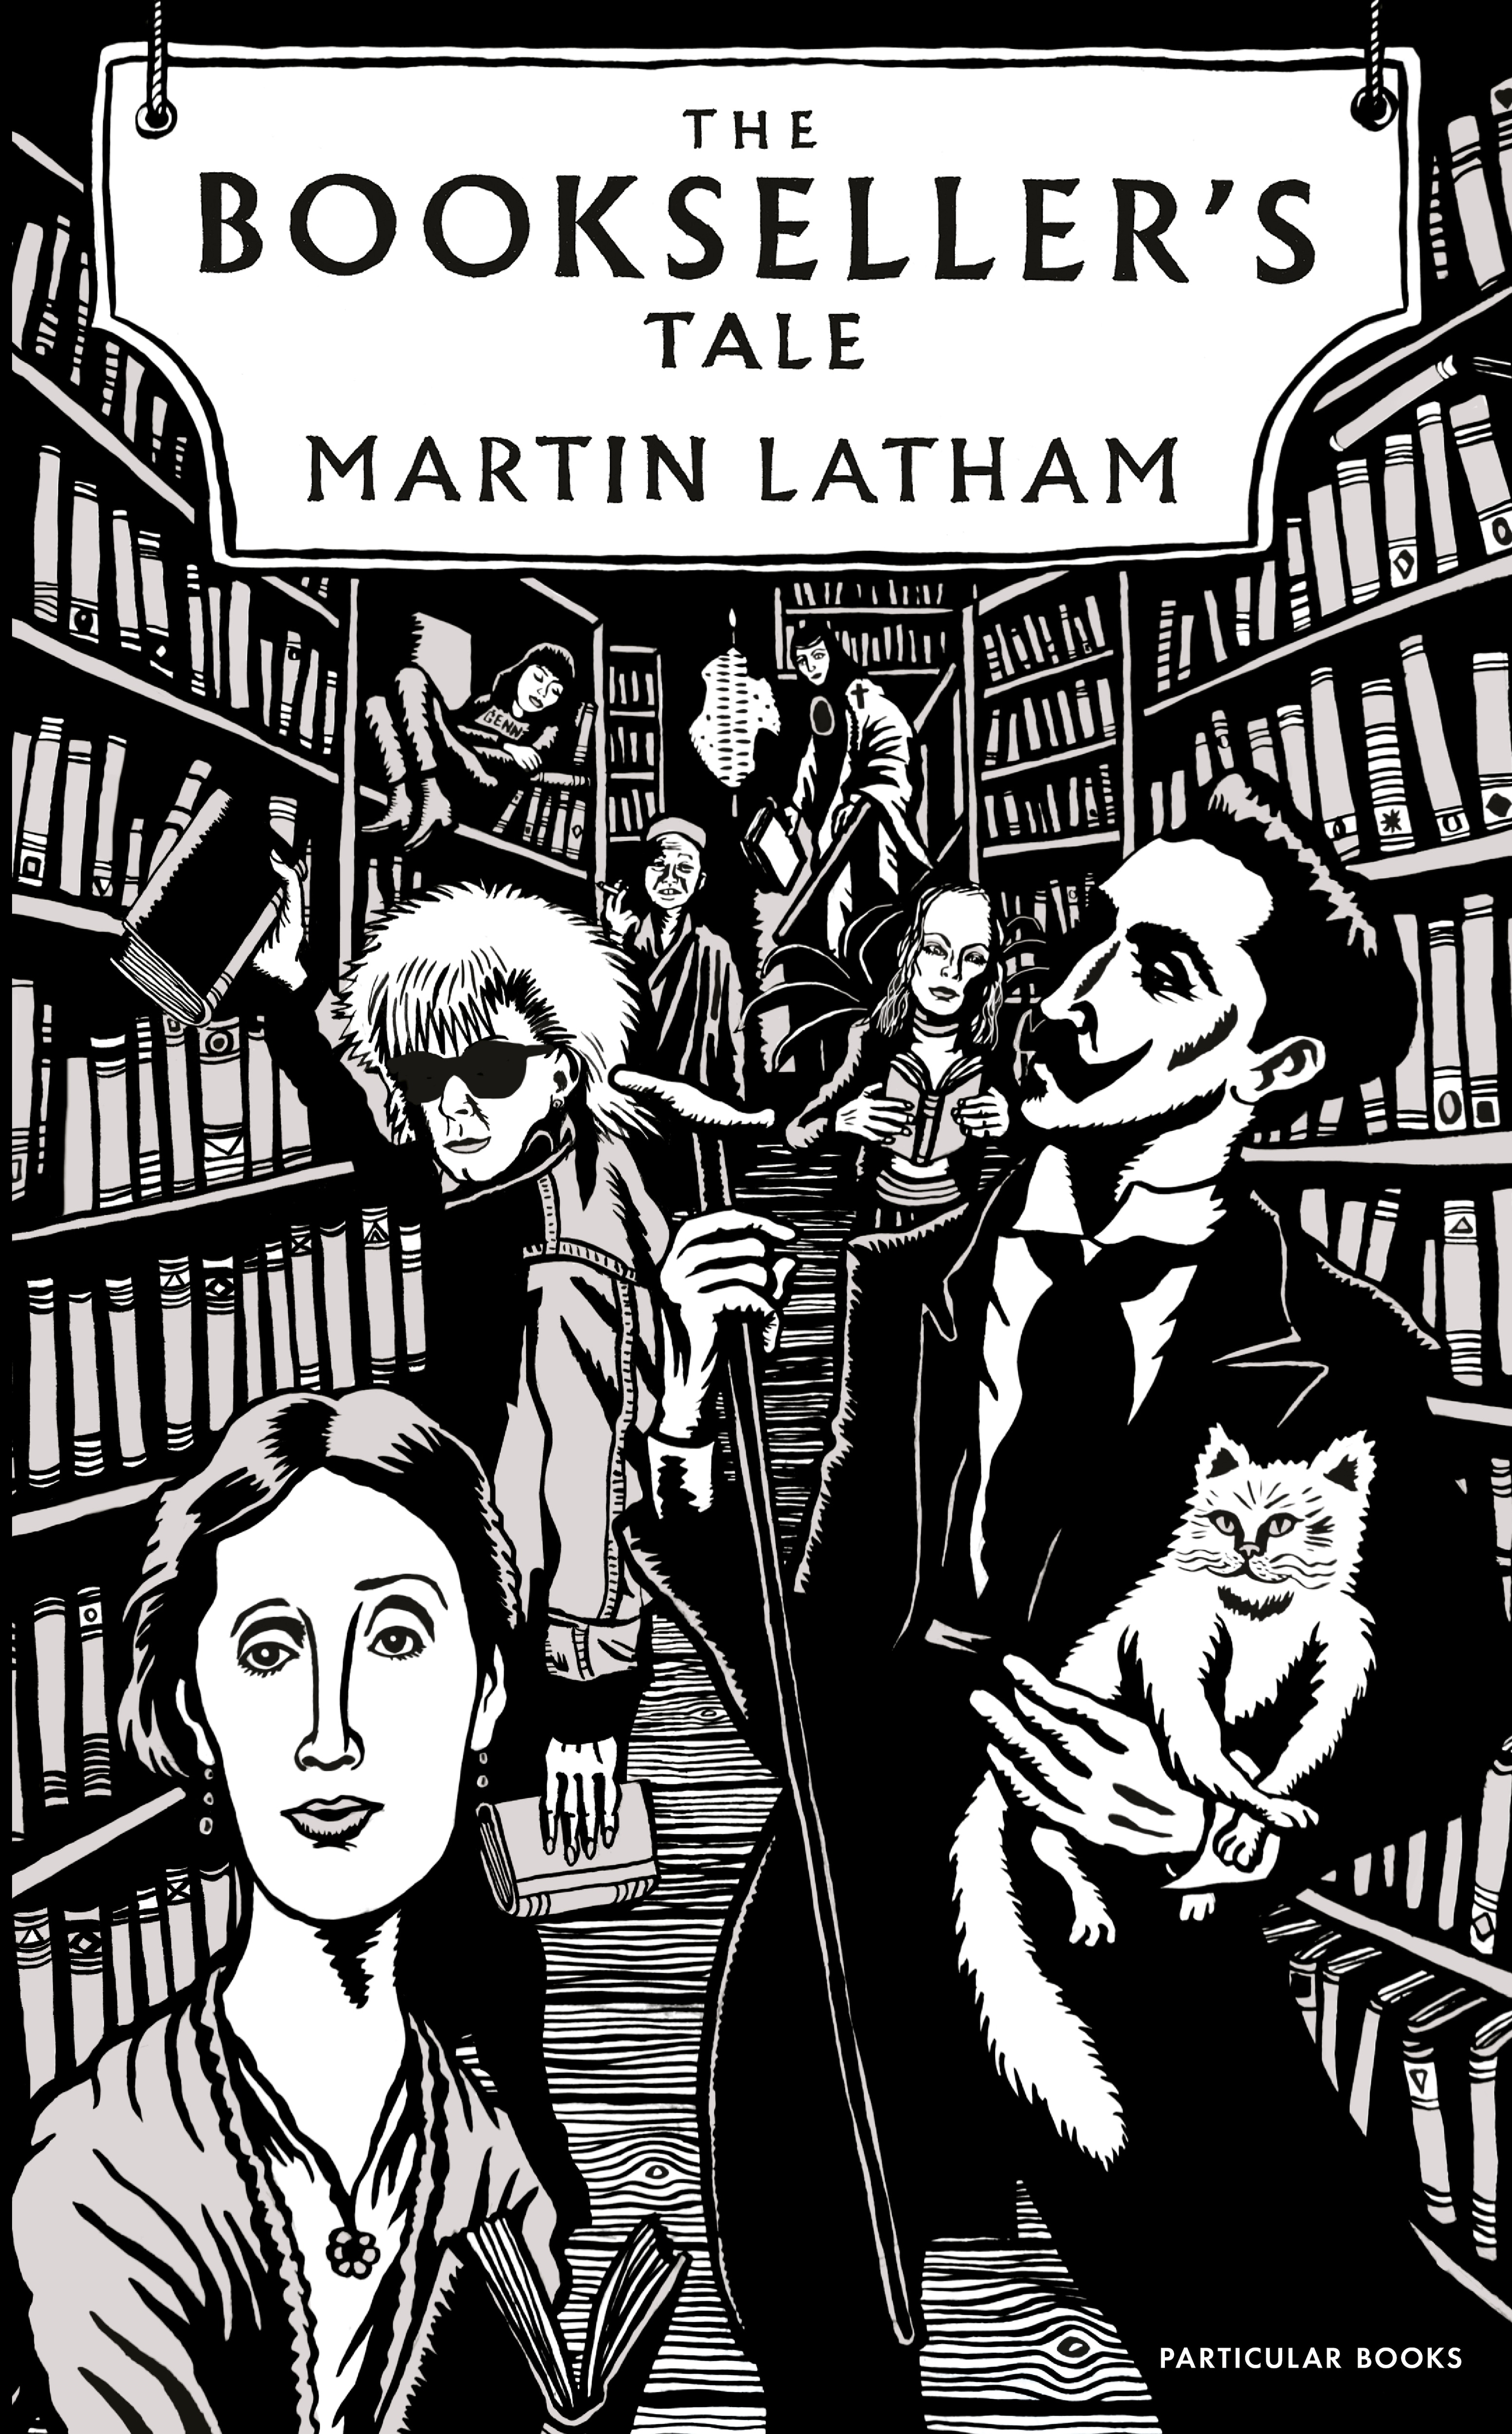 Book “The Bookseller's Tale” by Martin Latham — September 3, 2020